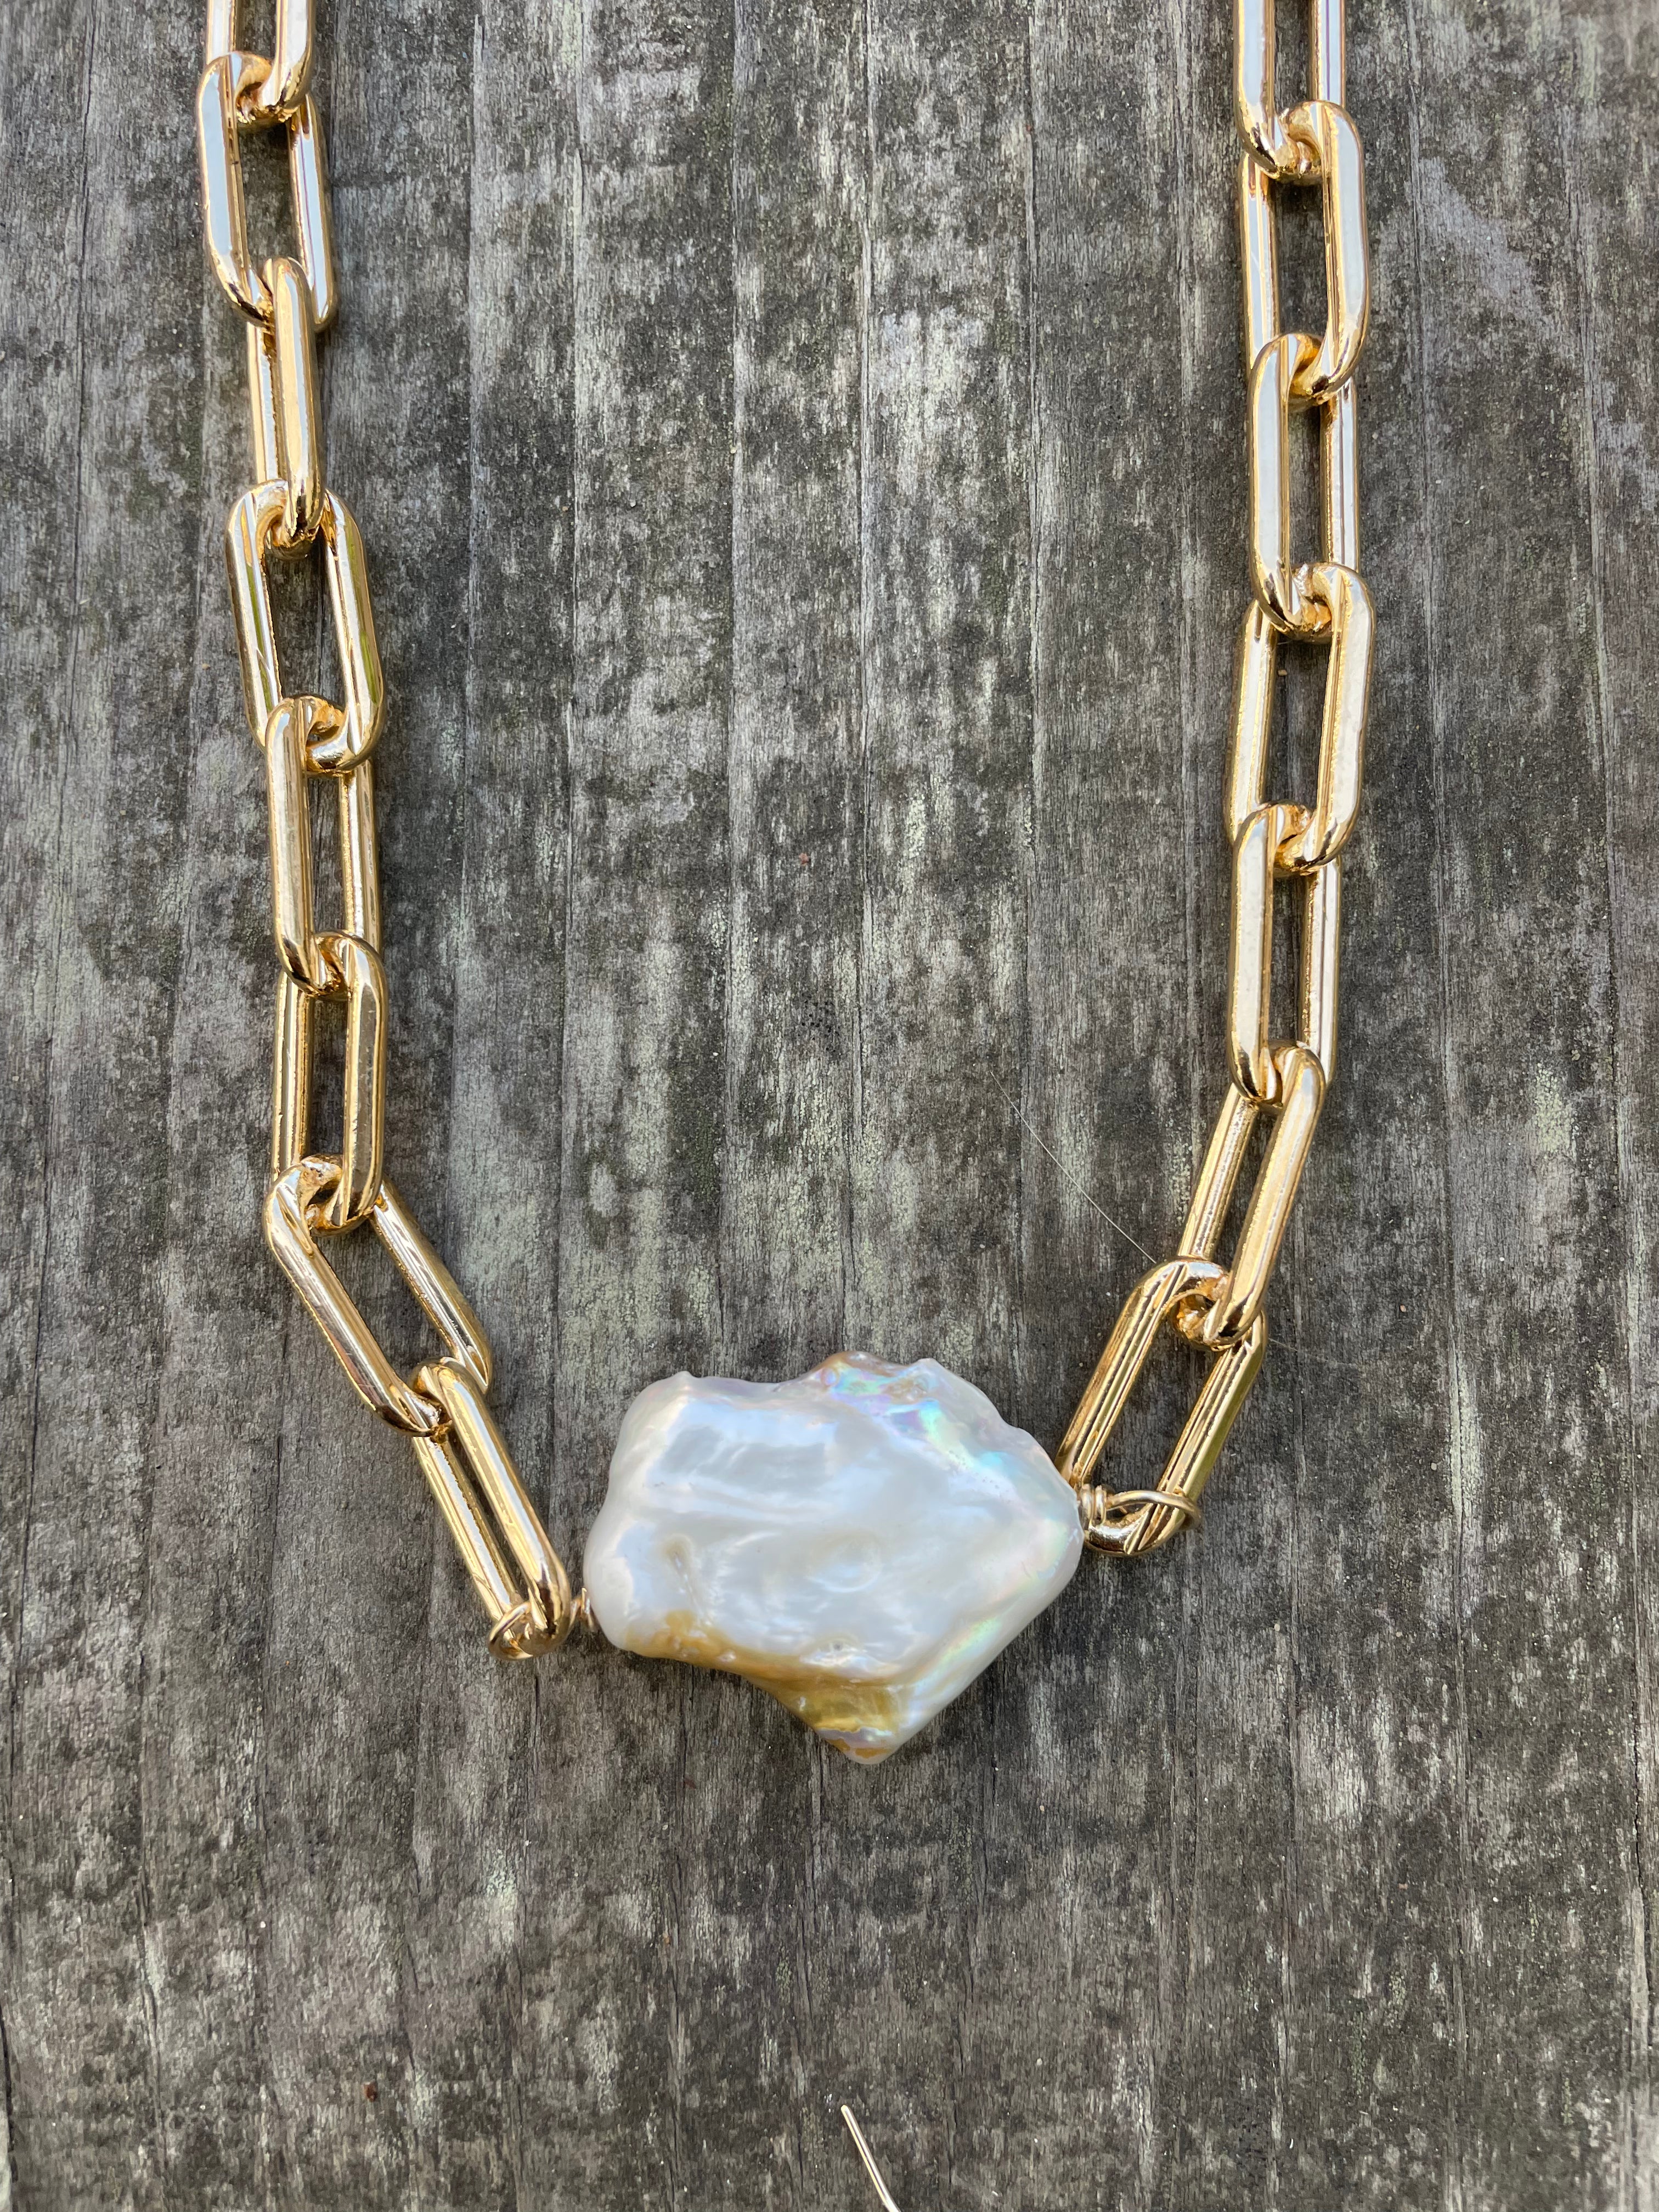 Extra large gold linked chain with a large white cloud shaped pearl on a wooden background